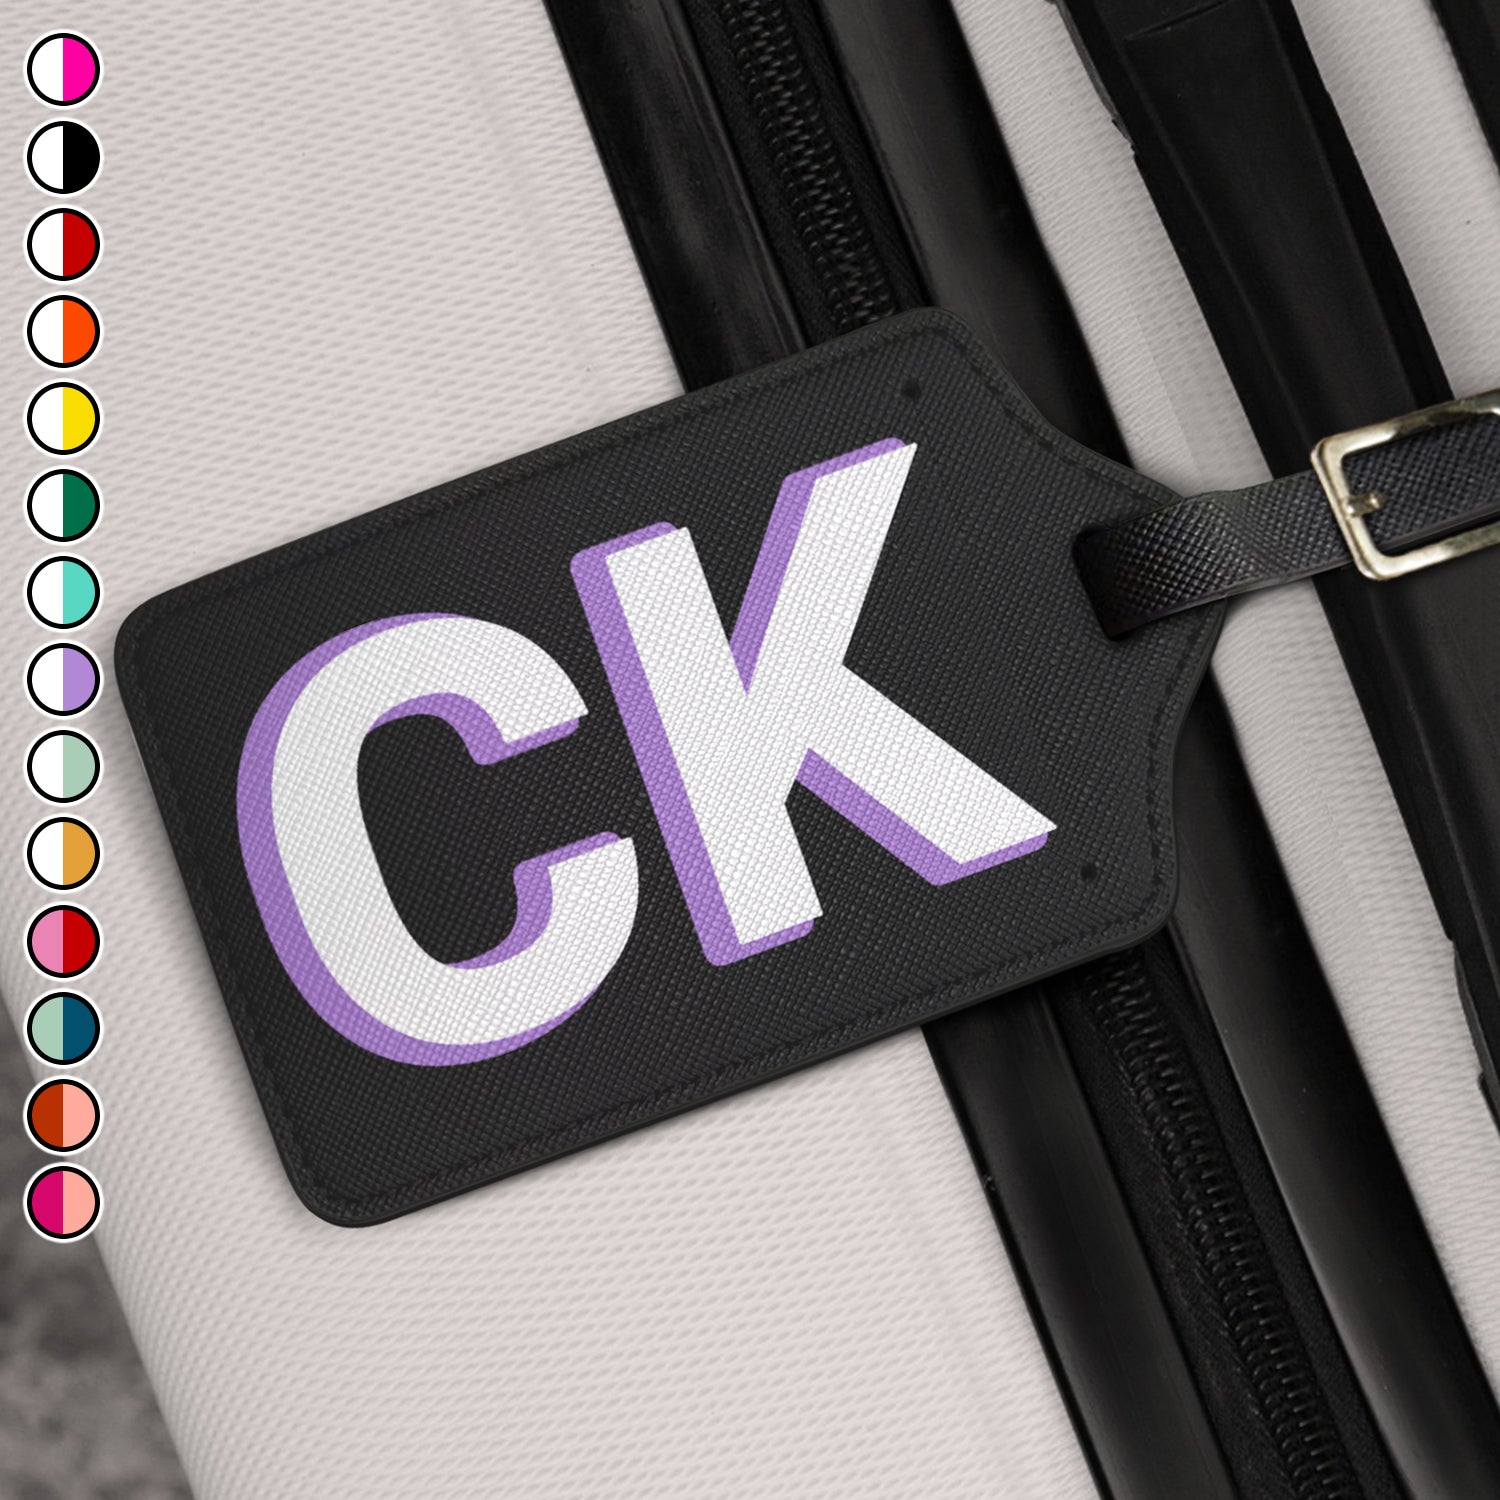 Shadow Monogram Name Tag - Gift For Traveling Lovers, Travelers - Personalized Luggage Tag